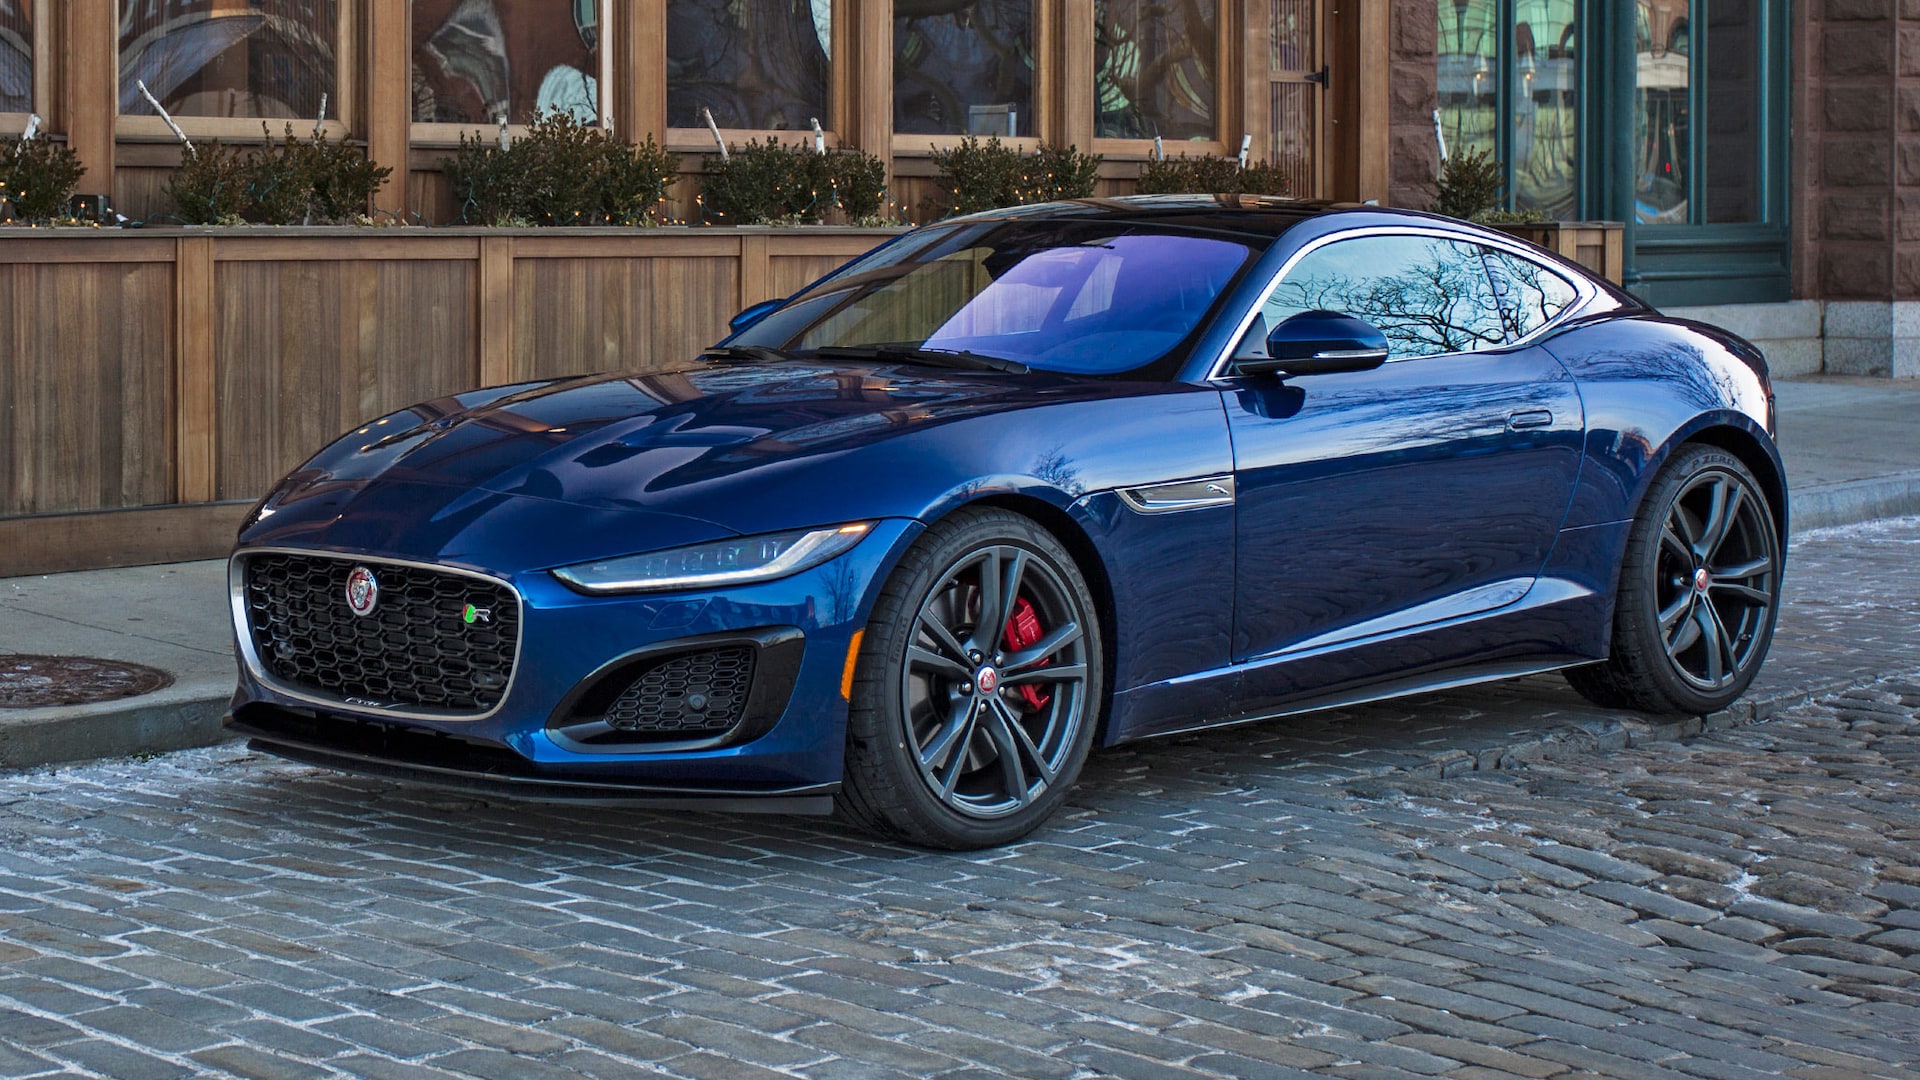 2023 Jaguar F-Type Prices, Reviews, and Photos - MotorTrend